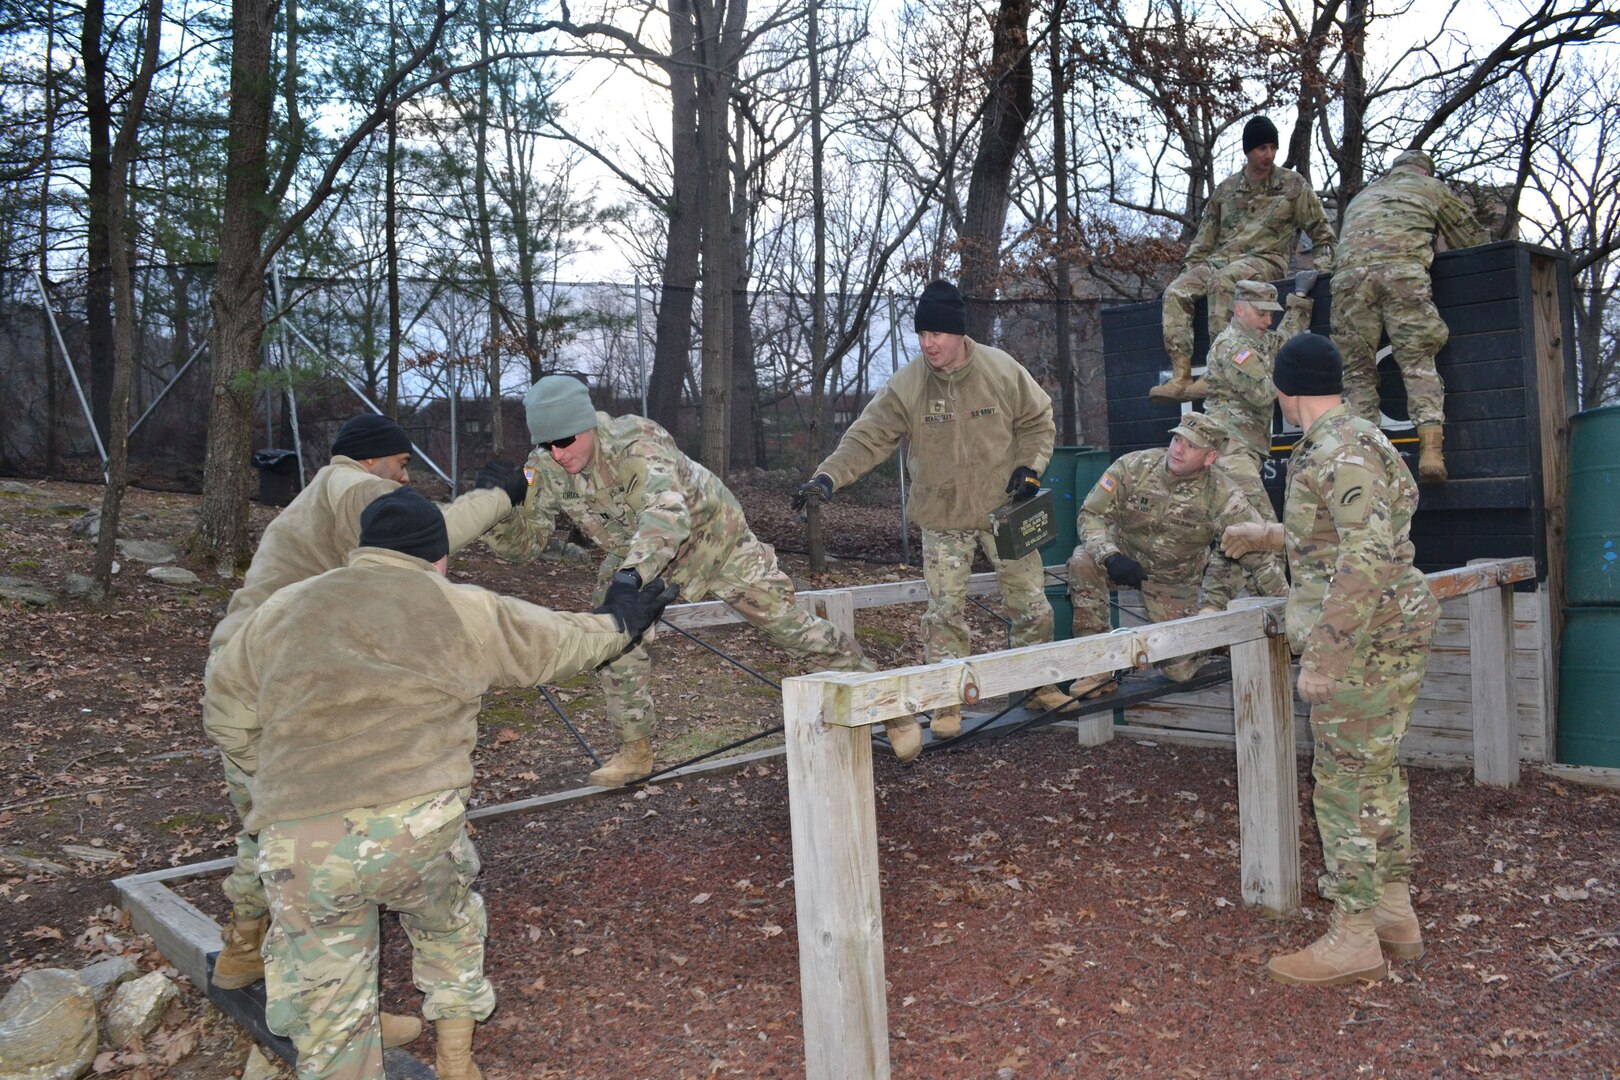 Officers and noncommissioned officers assigned to the 642nd  Aviation Support Battalion, New York Army National Guard, work  together on the “river crossing” obstacle at the United States Military Academy Leadership Reaction Course  at West Point, N.Y., on Dec. 8 2018. The training was designed so 642nd senior leaders could test their problem solving and decision-making skills while learning how to work better  together.